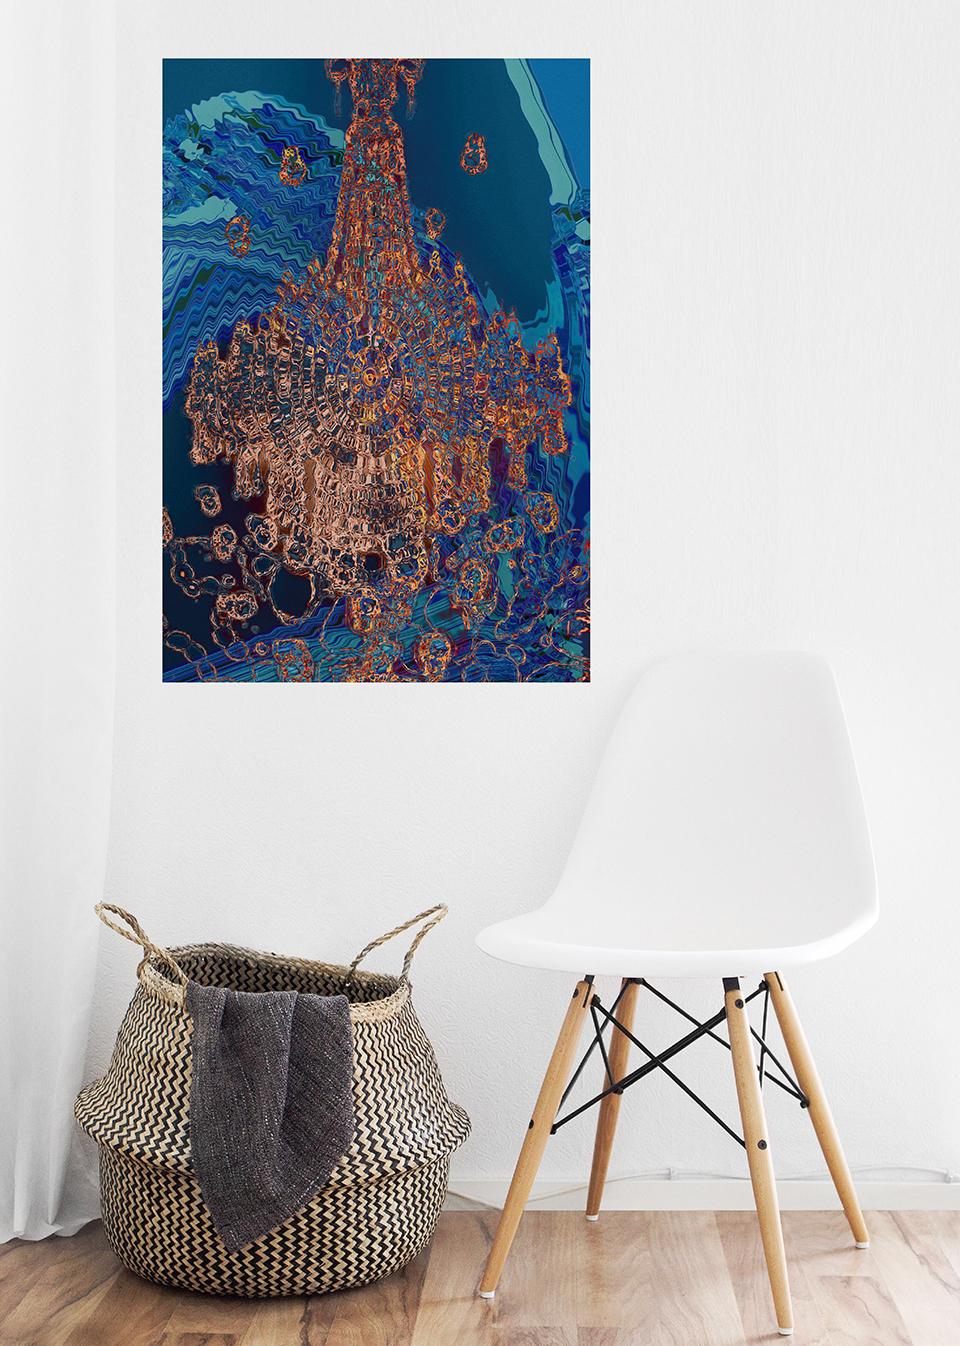 Blue Chandelier - Abstract Expressionist Painting by Julie Hartleib